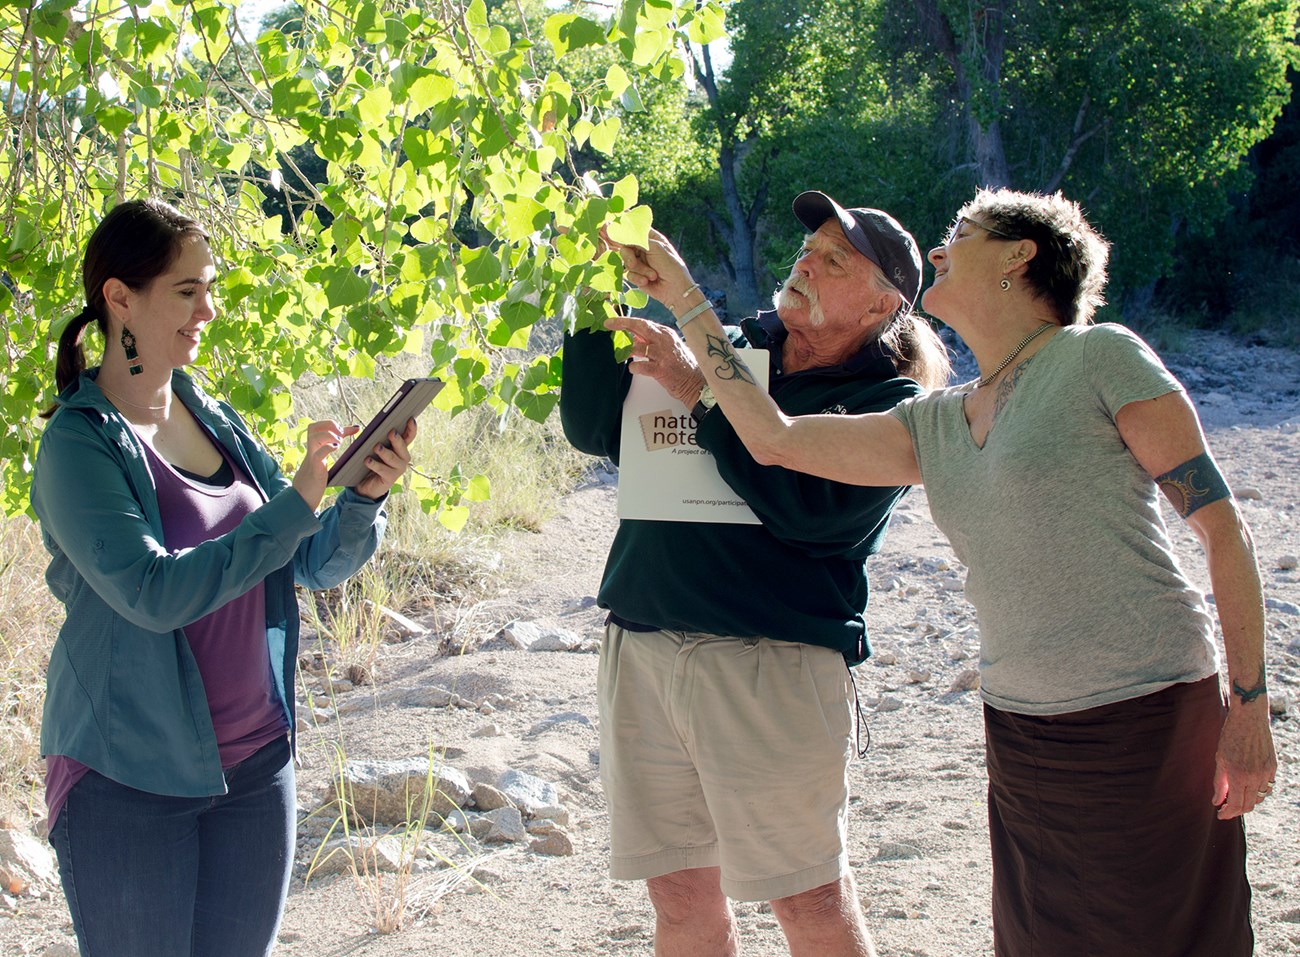 Two women and a man examine a cottonwood tree